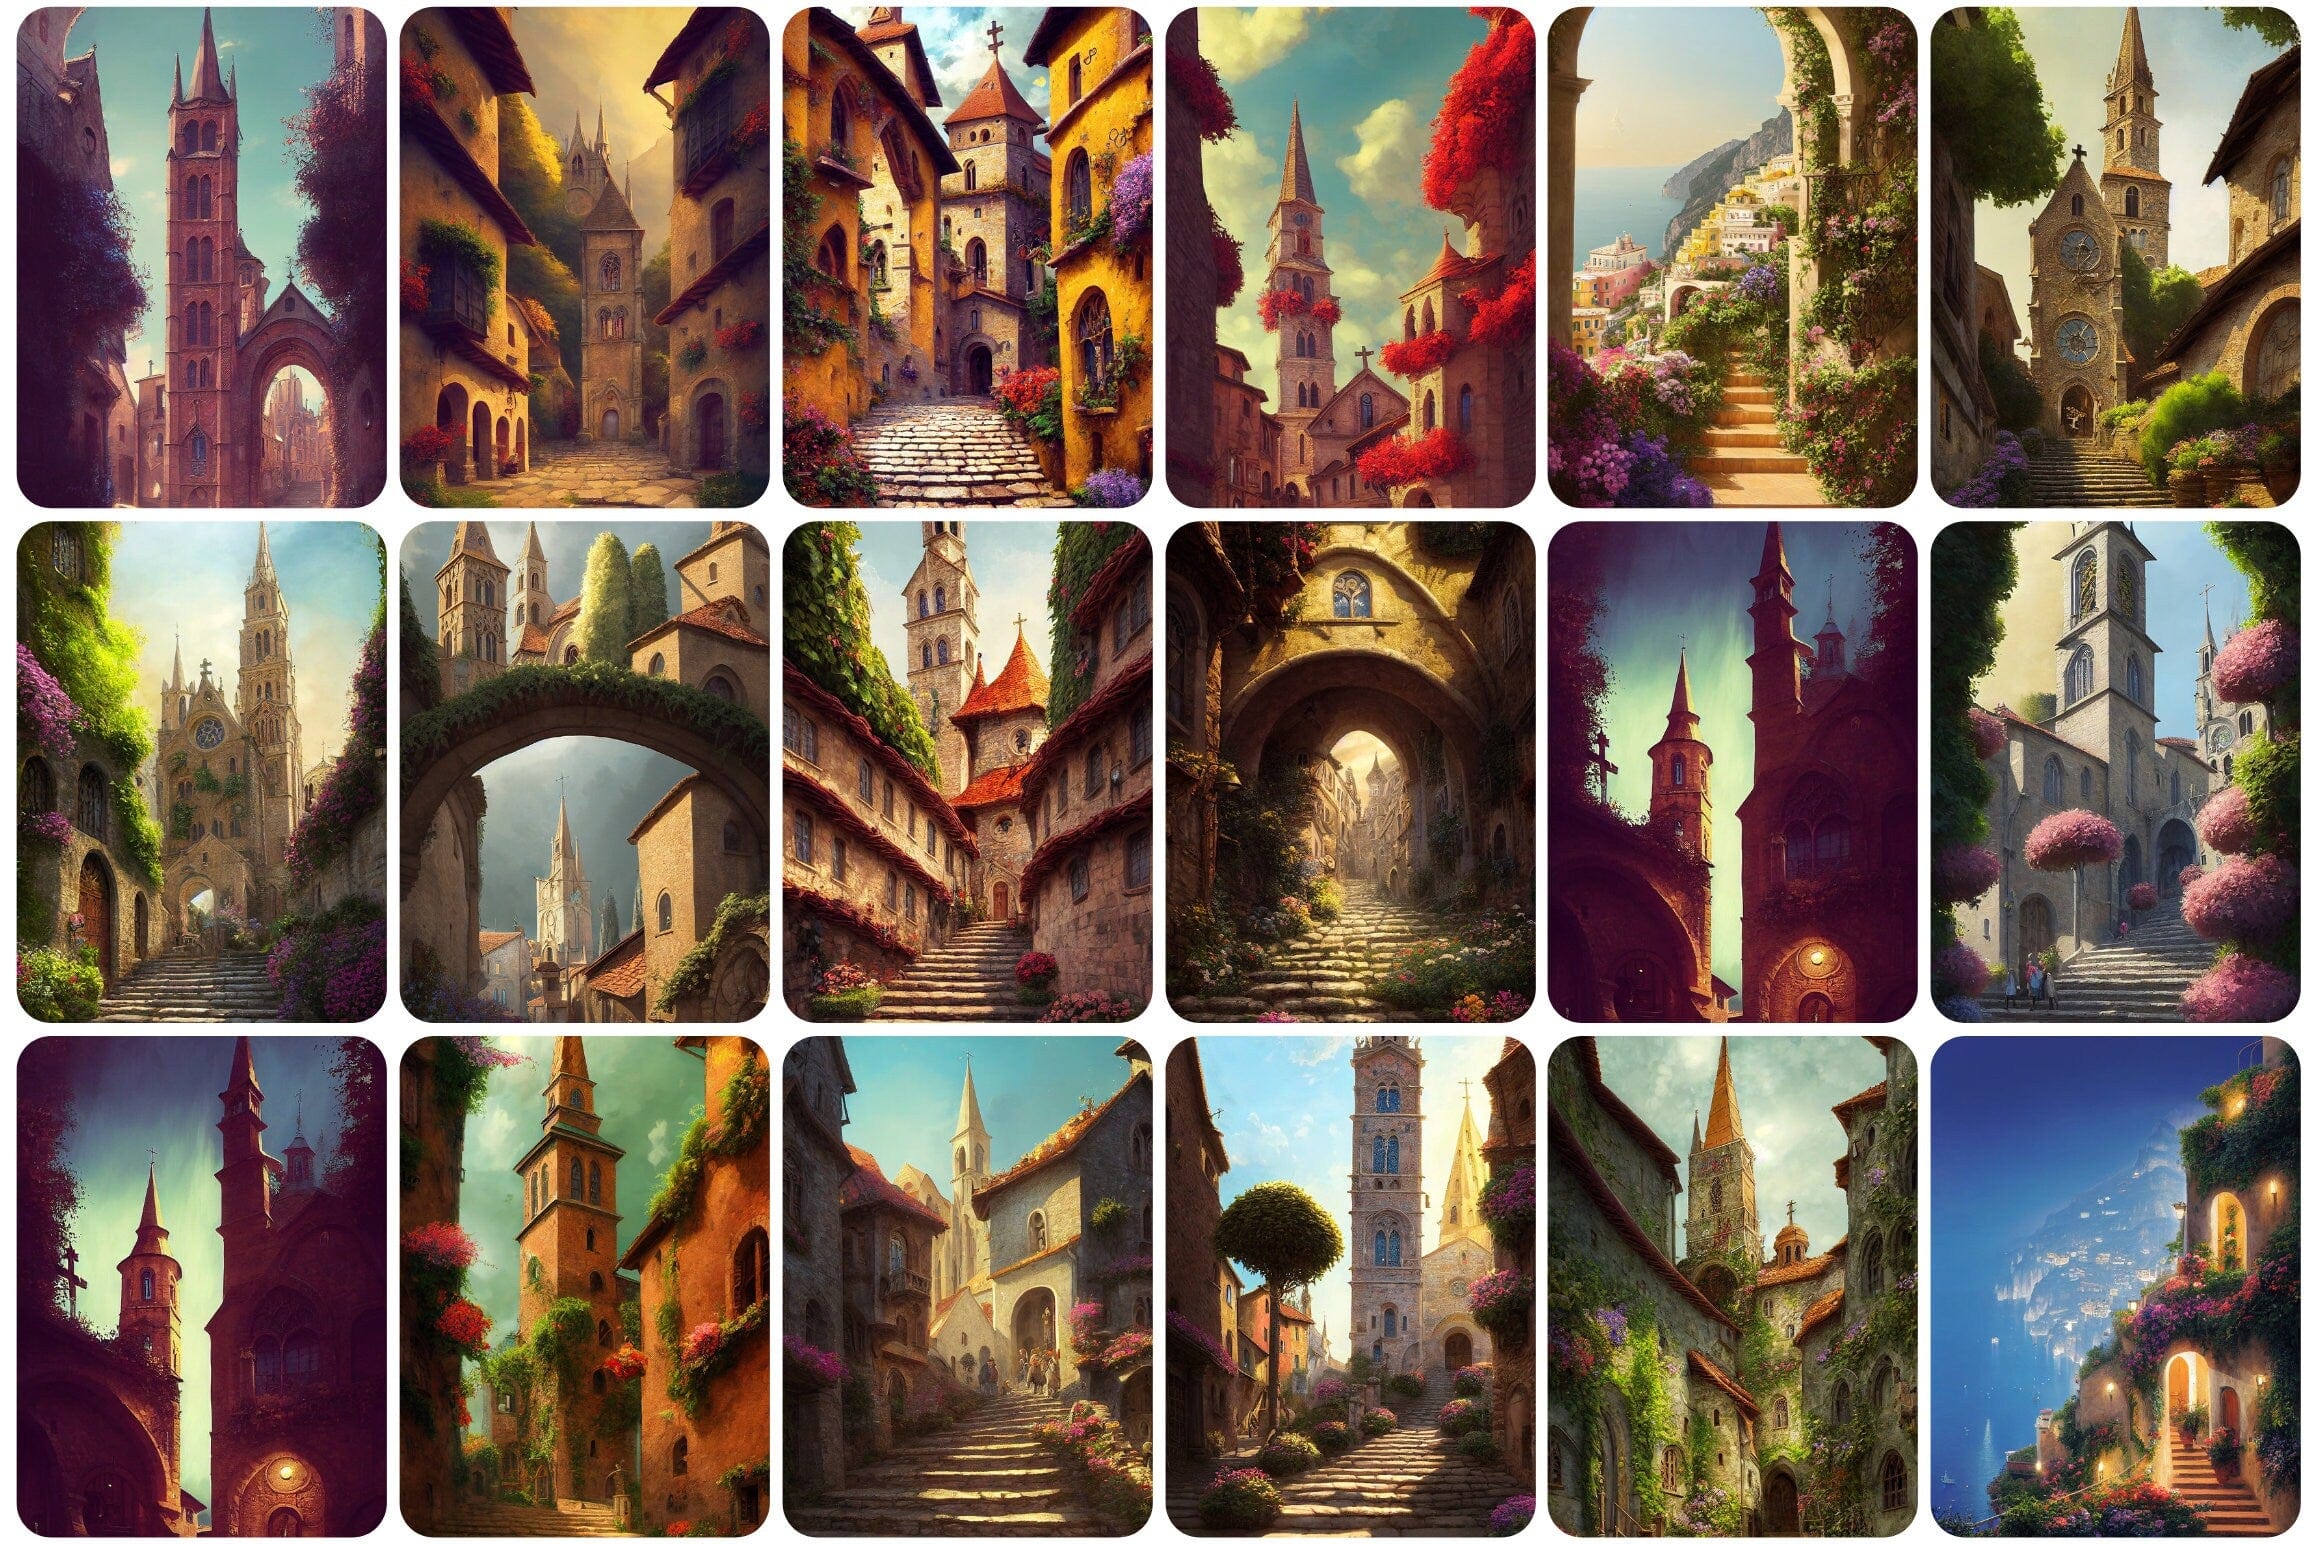 110+ High-Resolution Paintings of Renaissance-Inspired Taverns and Villas - Good for Home Decor, Art History Study - Historical Architecture Digital Download Sumobundle